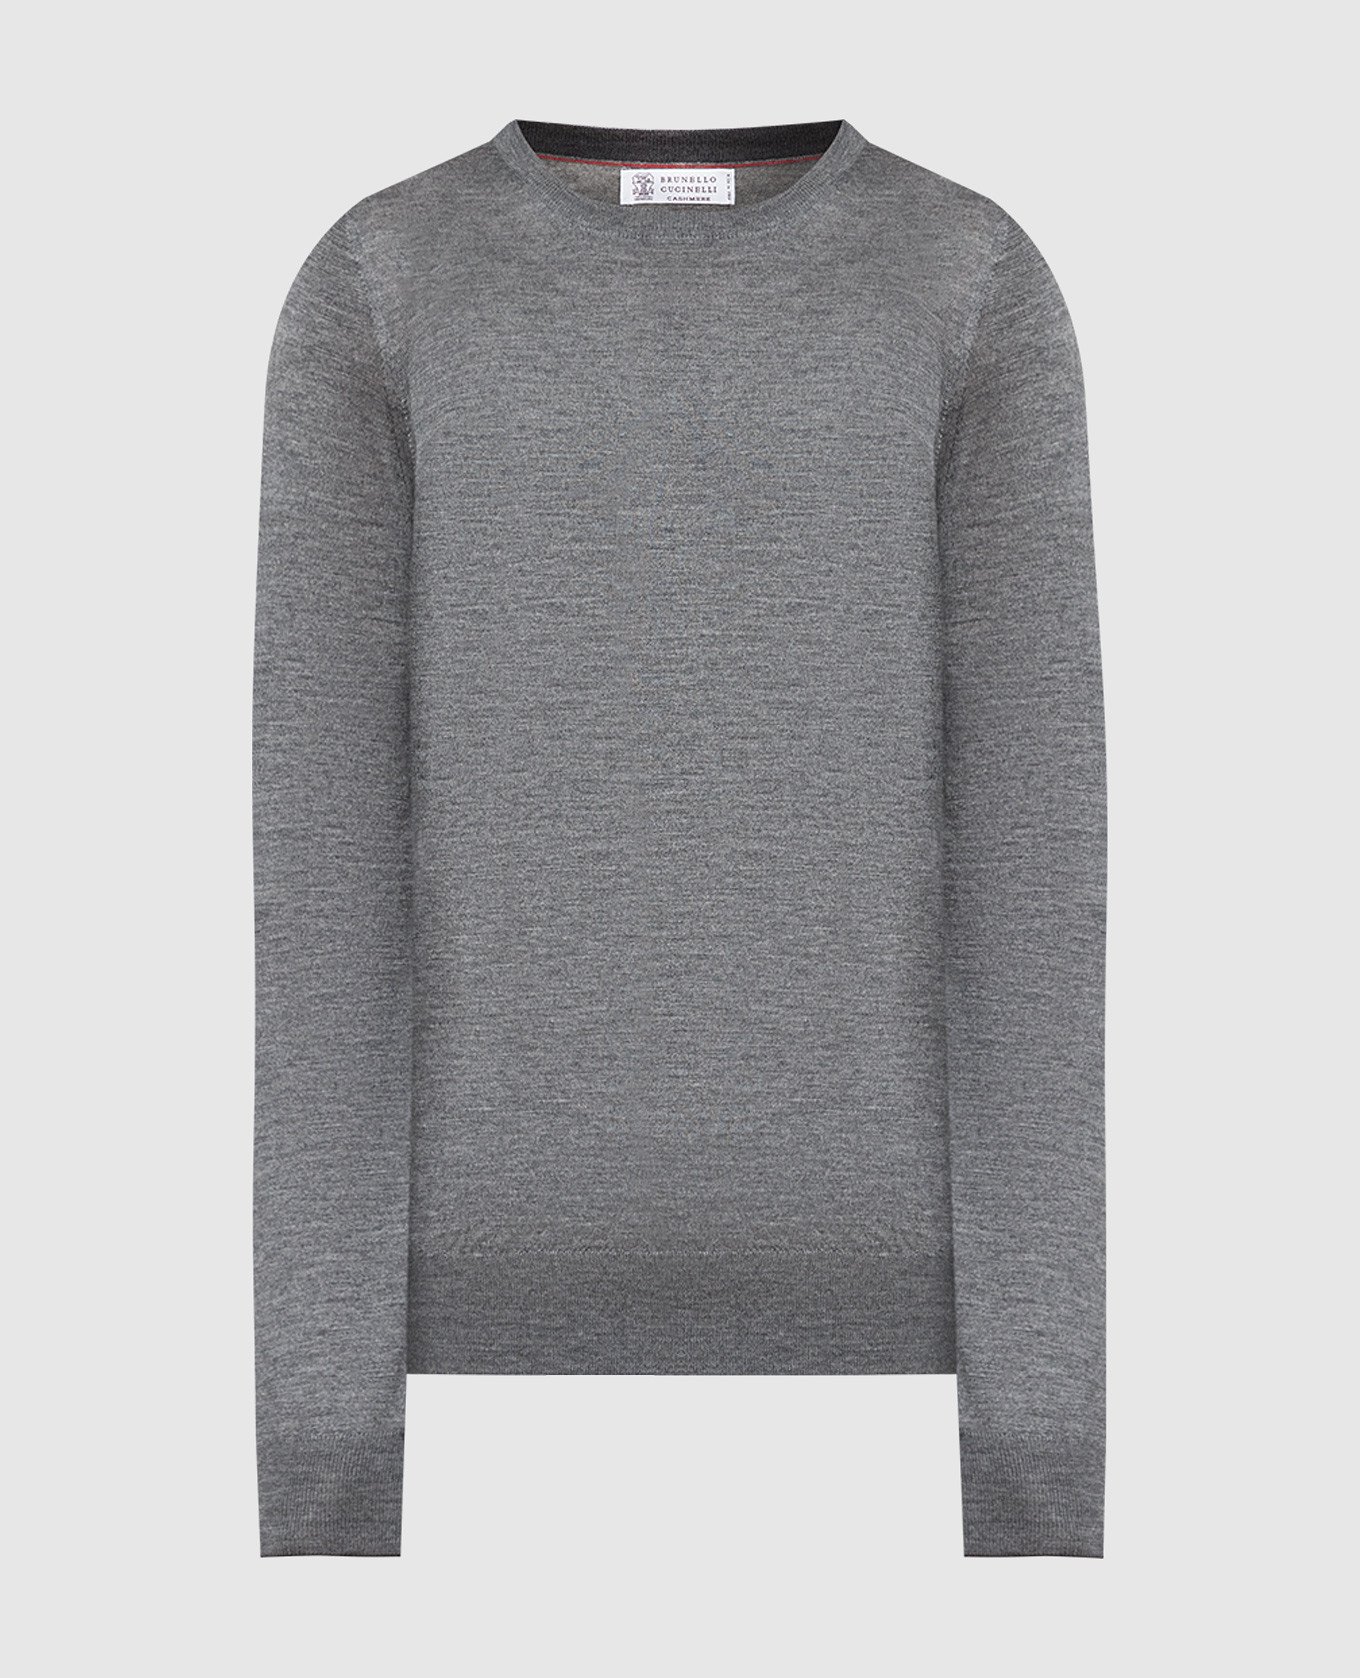 Gray jumper made of cashmere and silk